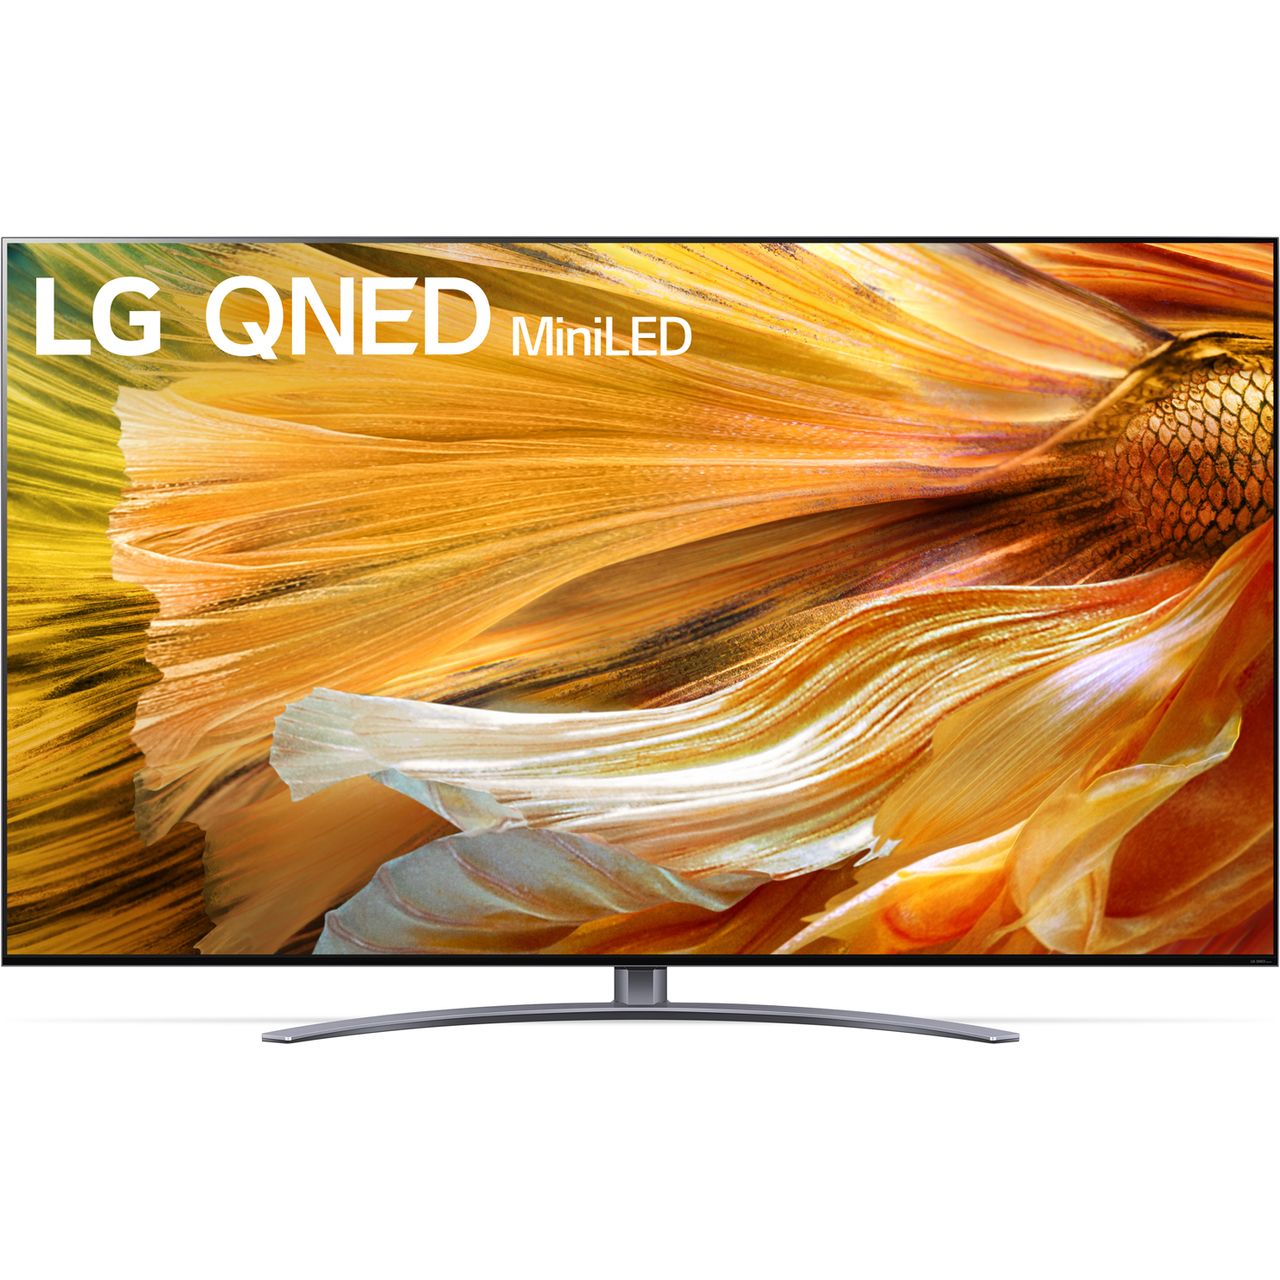 LG QNED91-Serie 86QNED919PA Fernseher - Schwarz